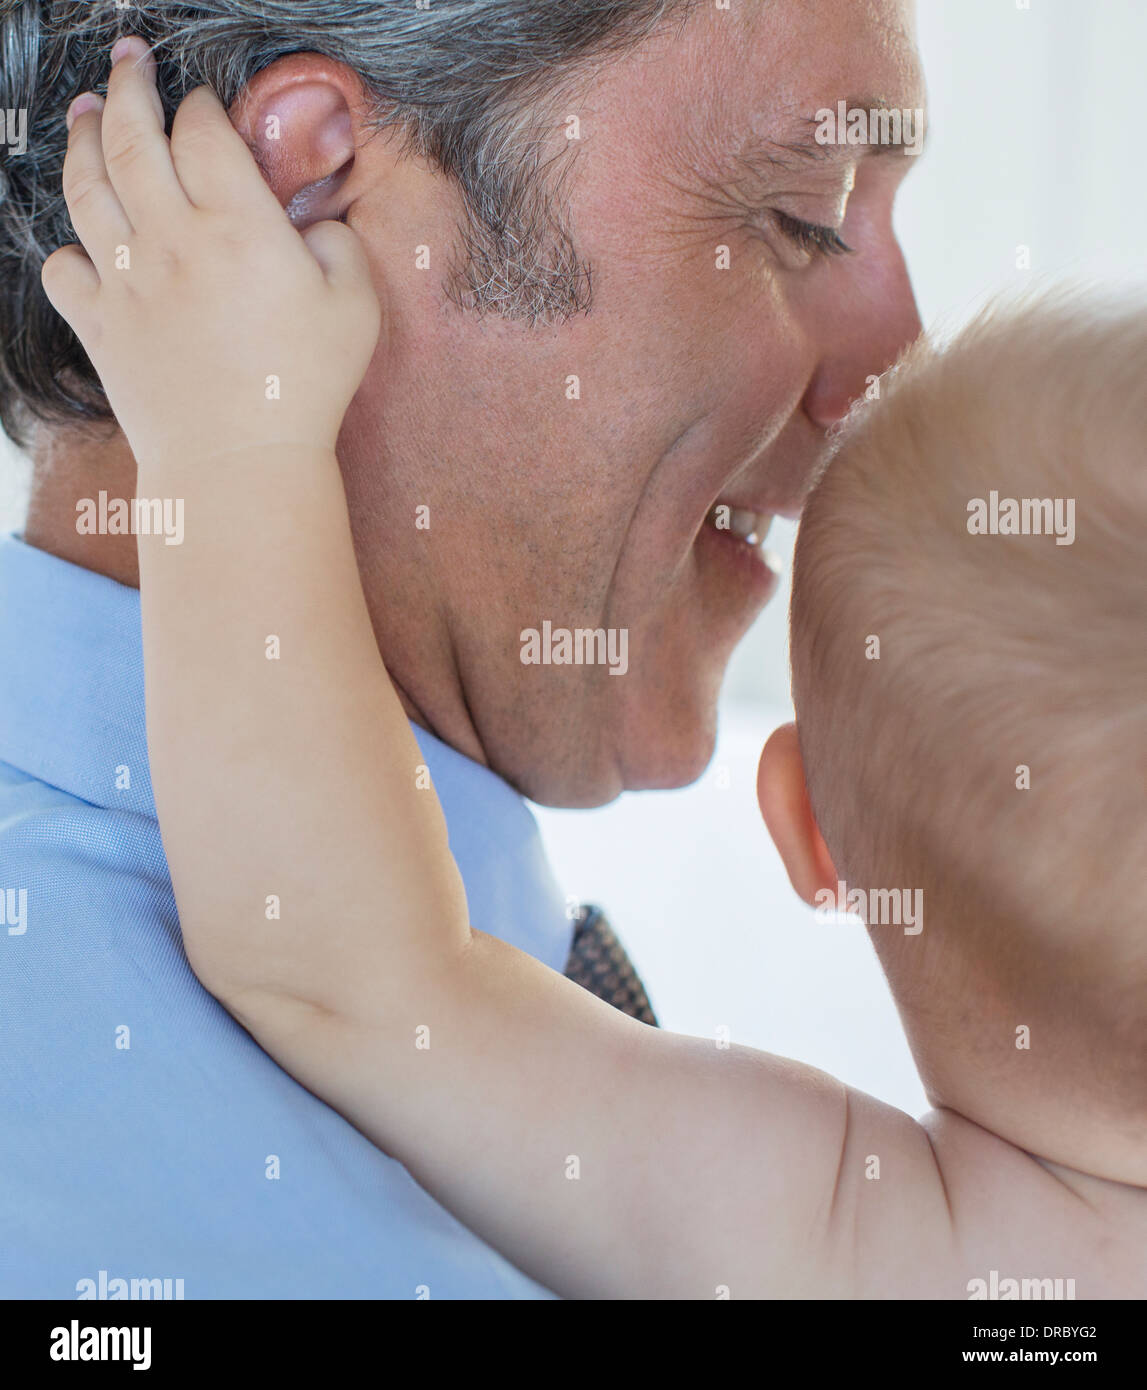 Close up of baby grabbing father's ear Stock Photo